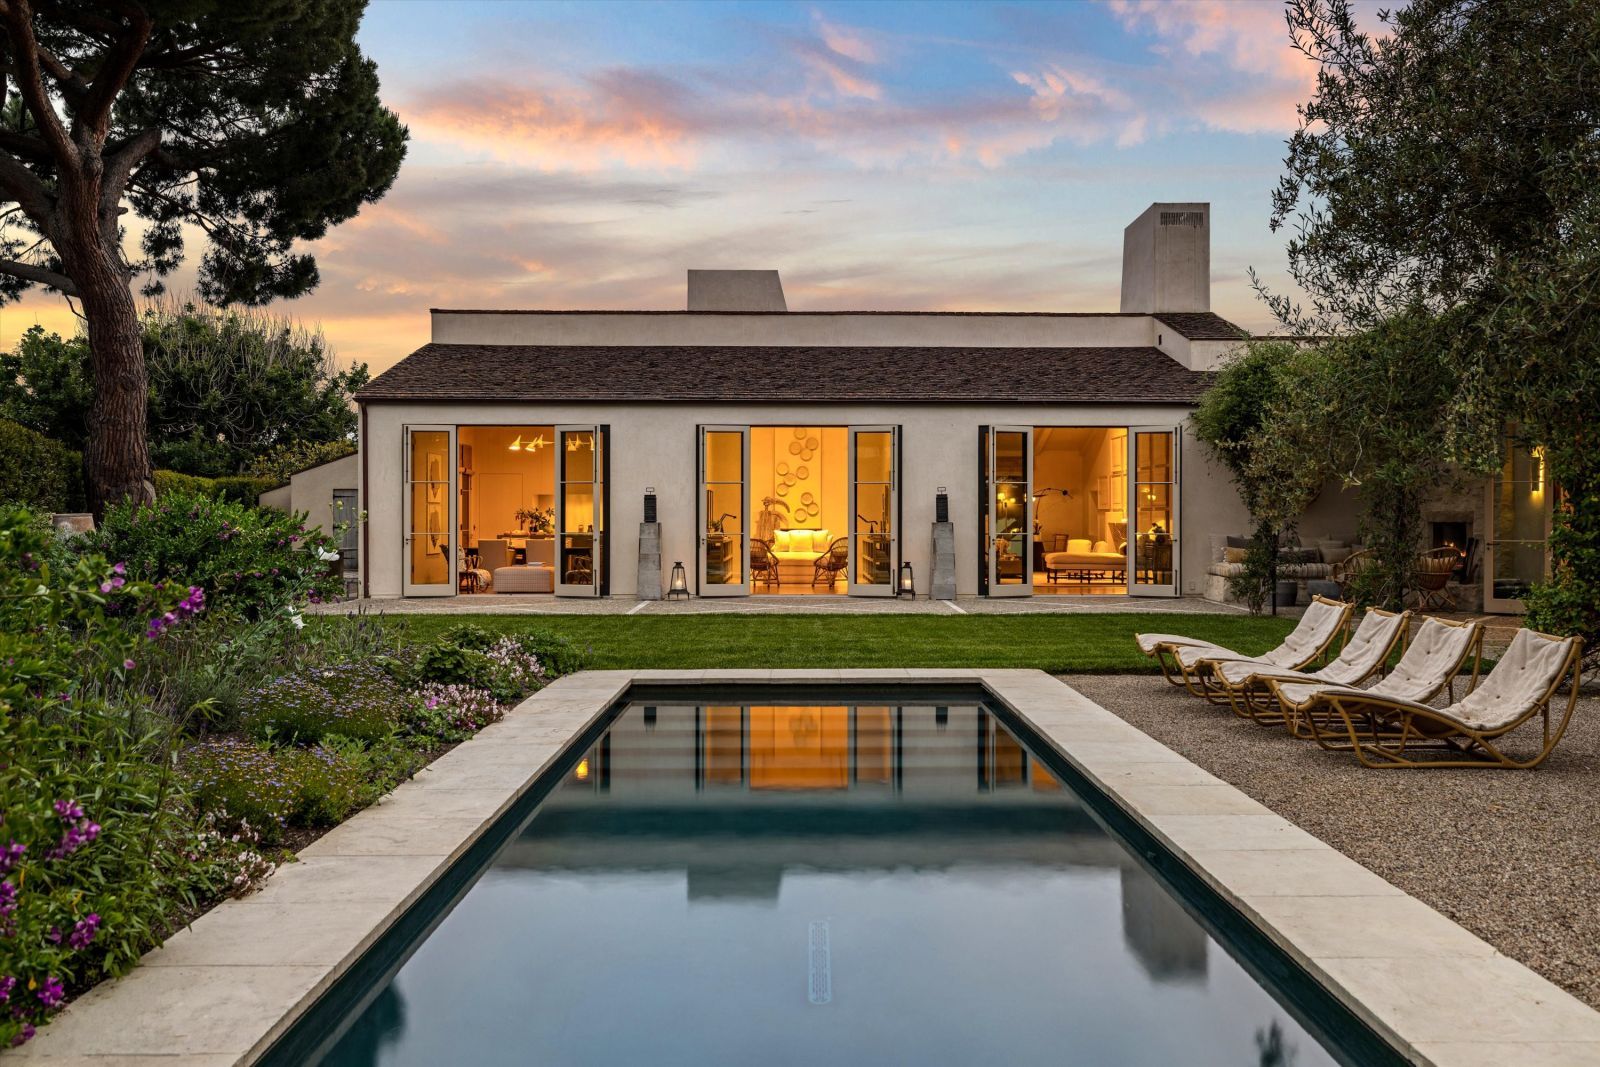 The backyard and pool looking into Suzanne Reichstein's Montecito home at dusk.